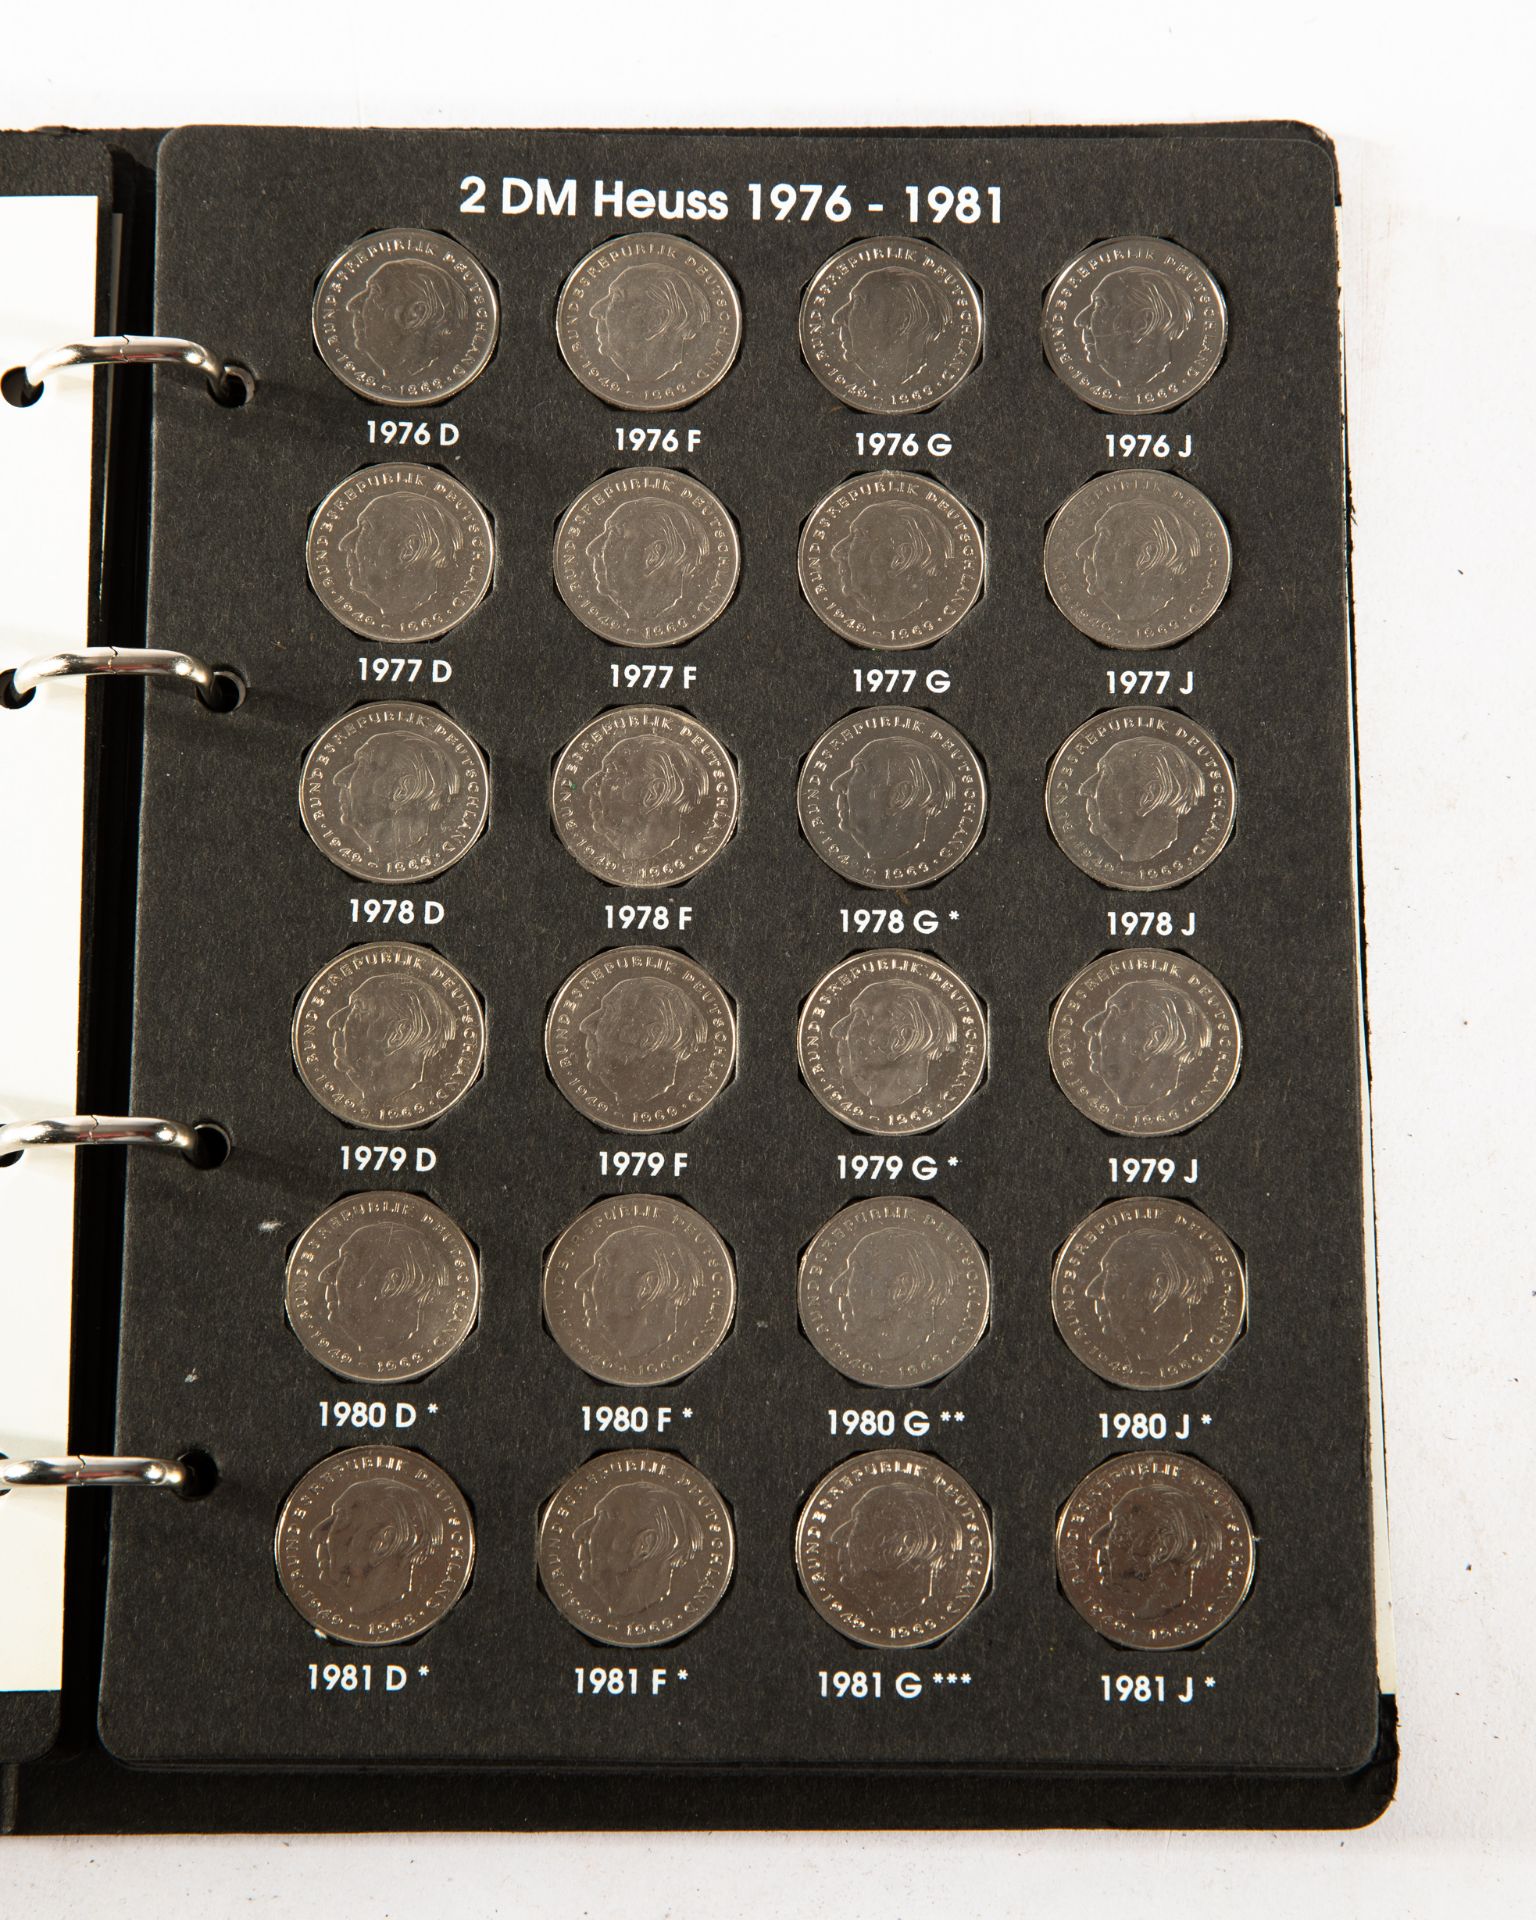 Germany - 2x full coin albums 2 DM Coins 1970-1996 - Image 13 of 33